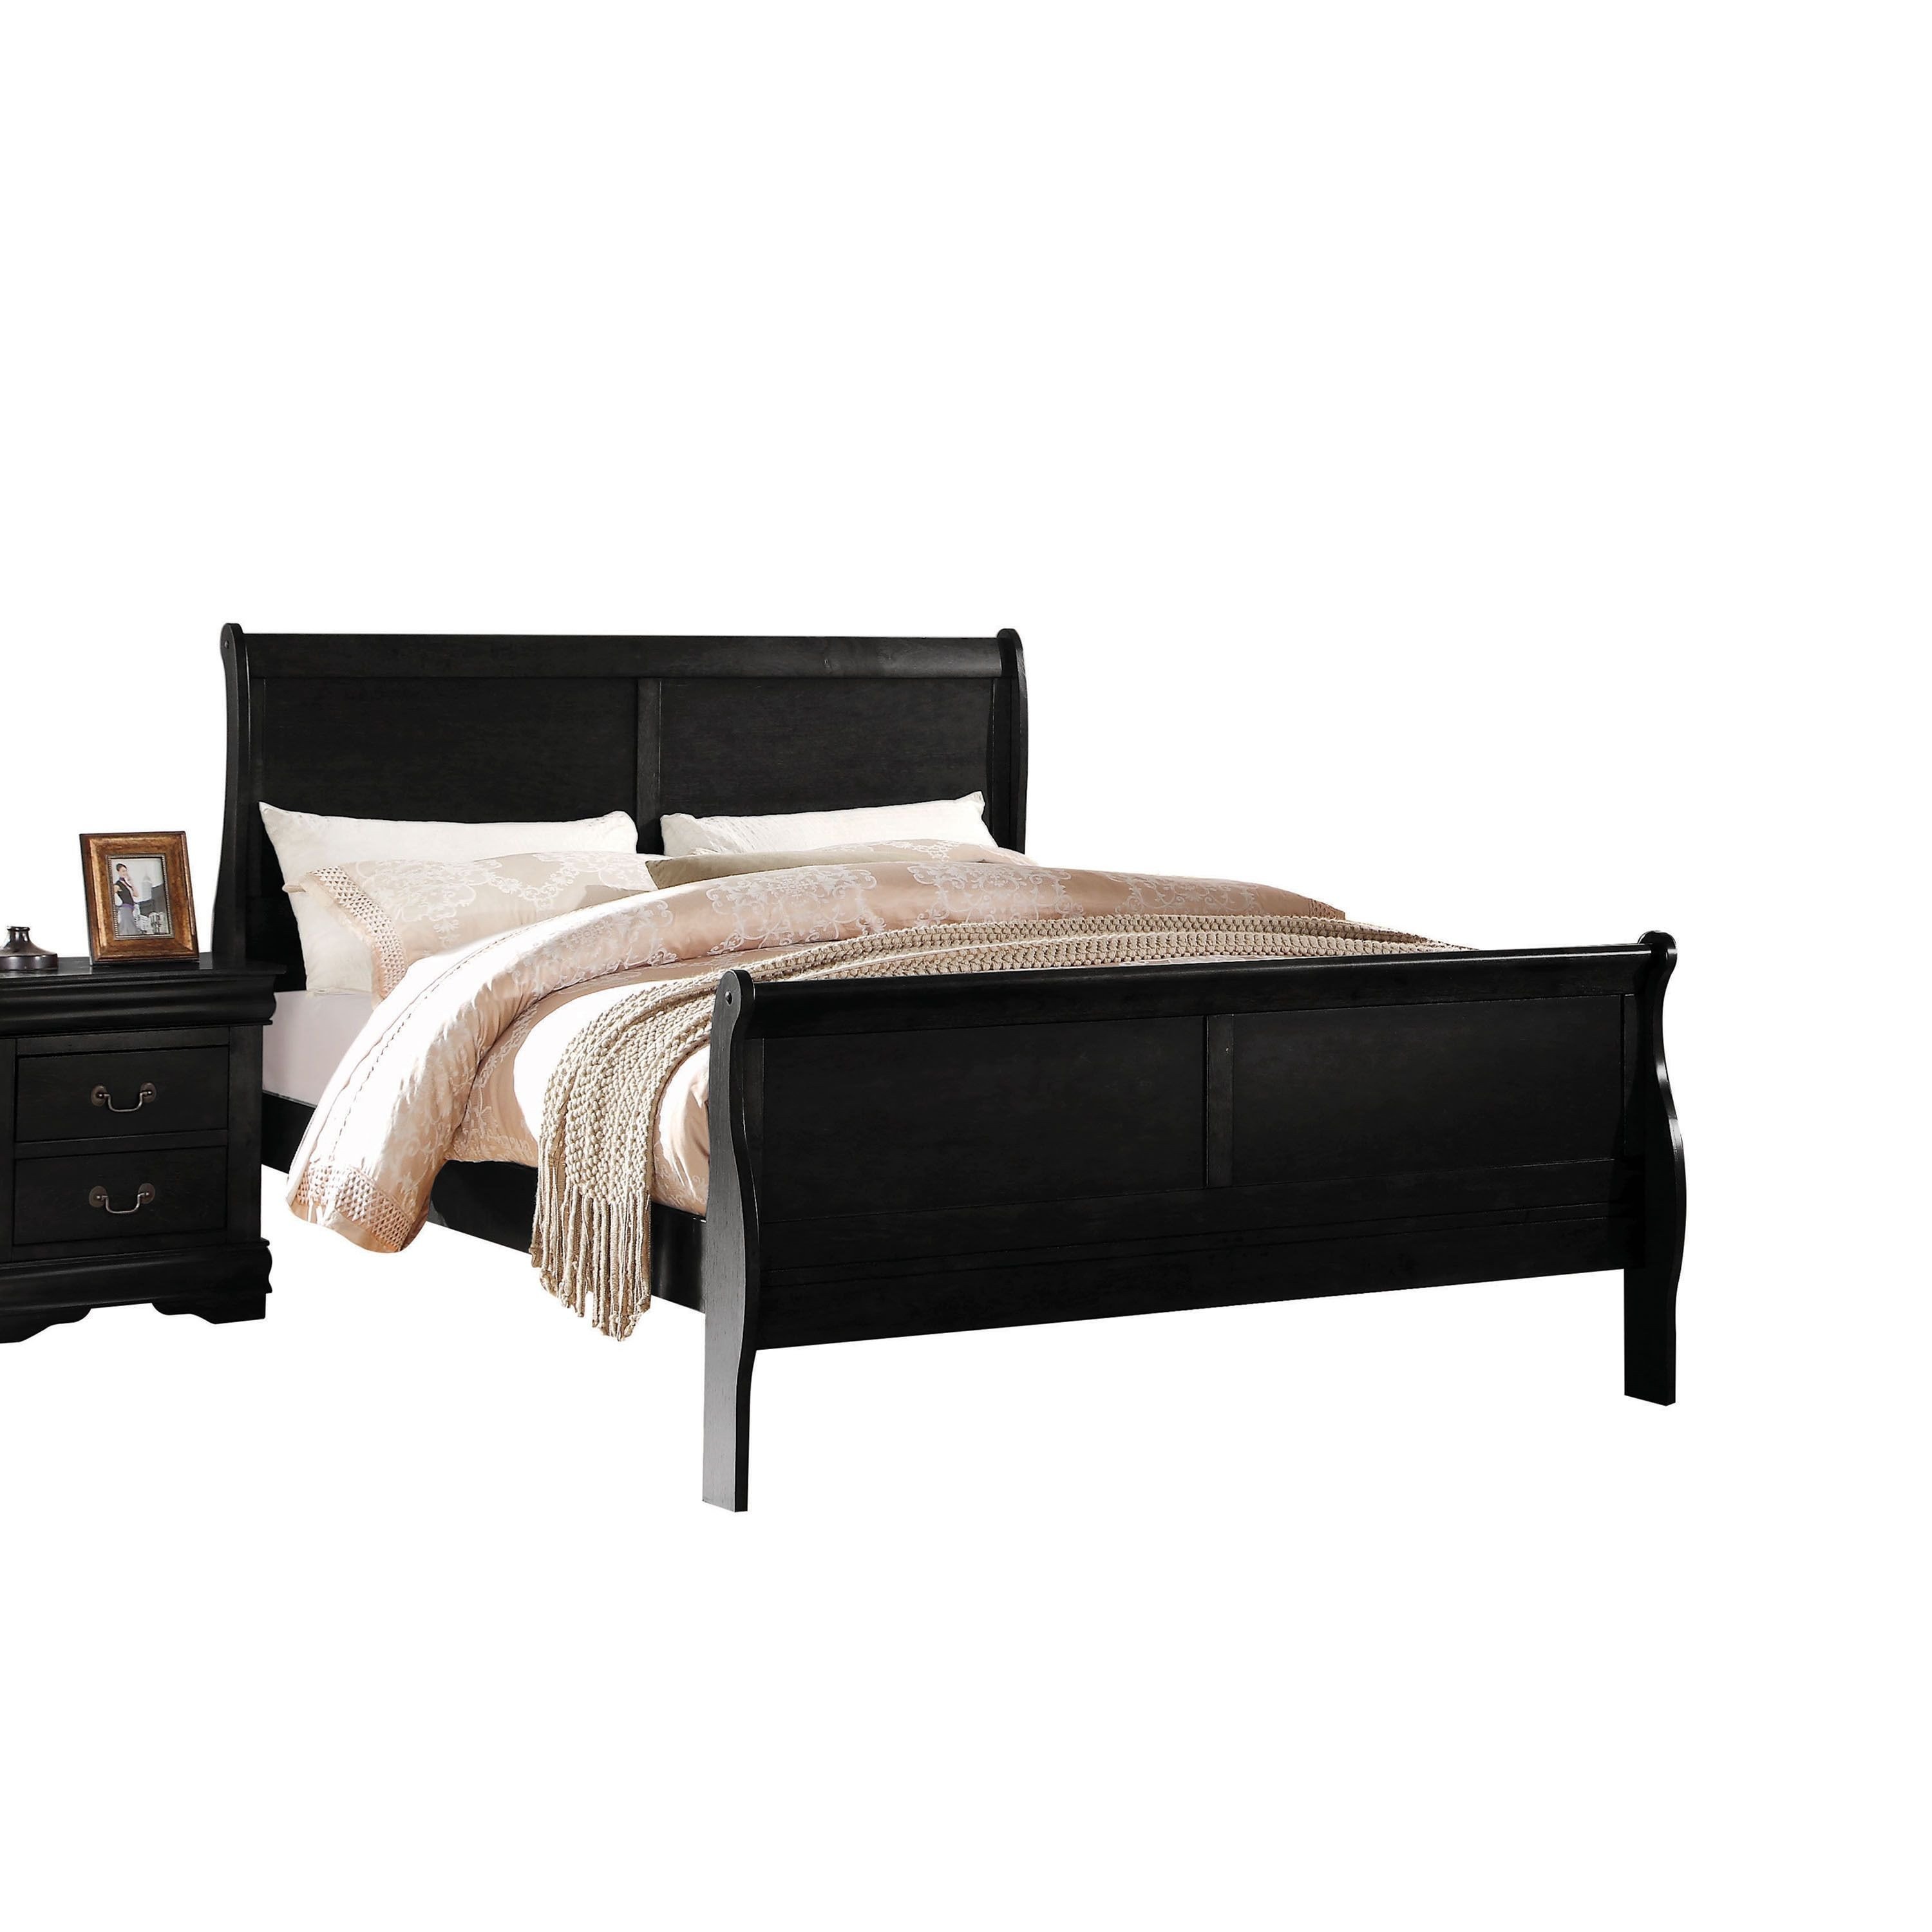 Cheap Black Bedroom Furniture Lovely Acme Furniture Louis Philippe Bed Black Twin Bed 85 X 41